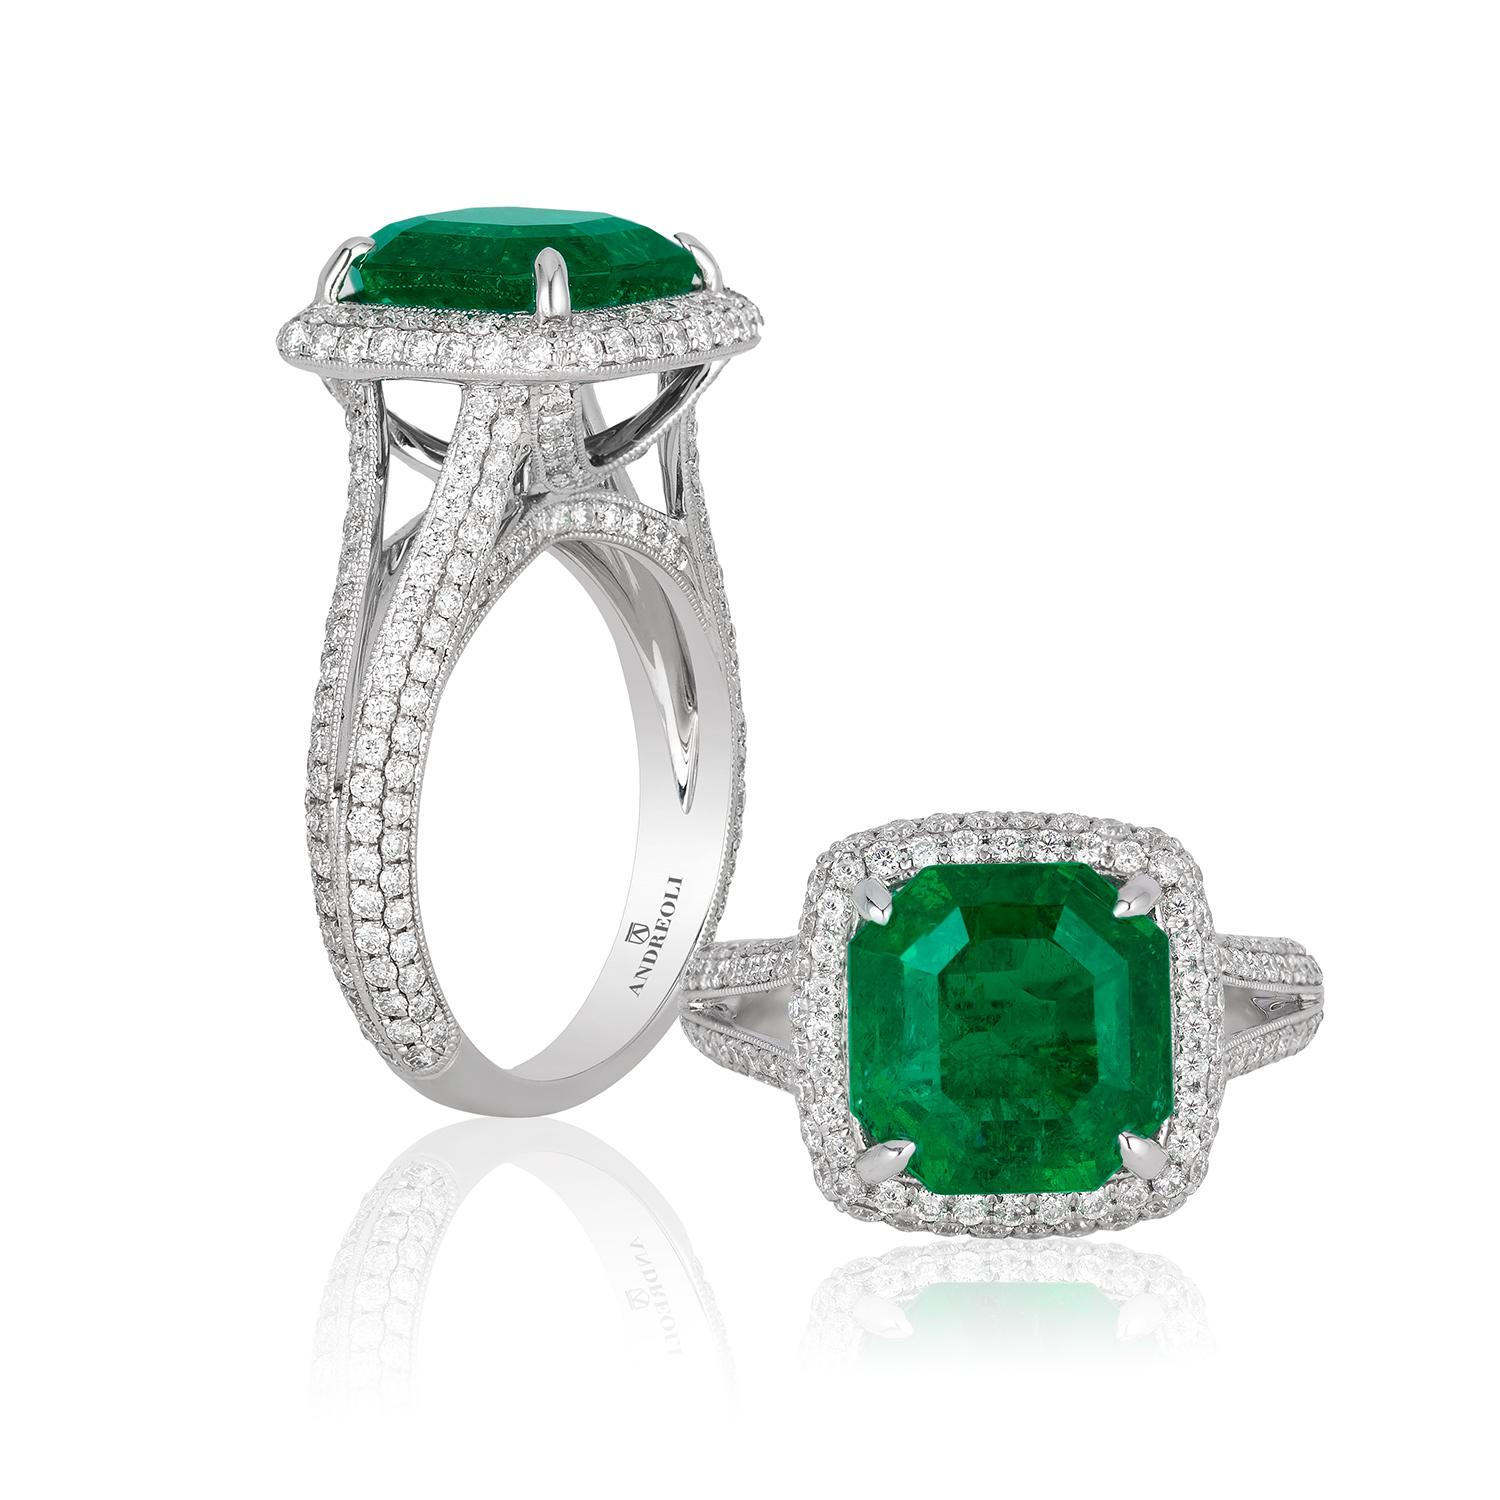 Contemporary Andreoli 4.17 Carat Emerald Diamond 18 Karat White Gold Ring CDC Certified For Sale